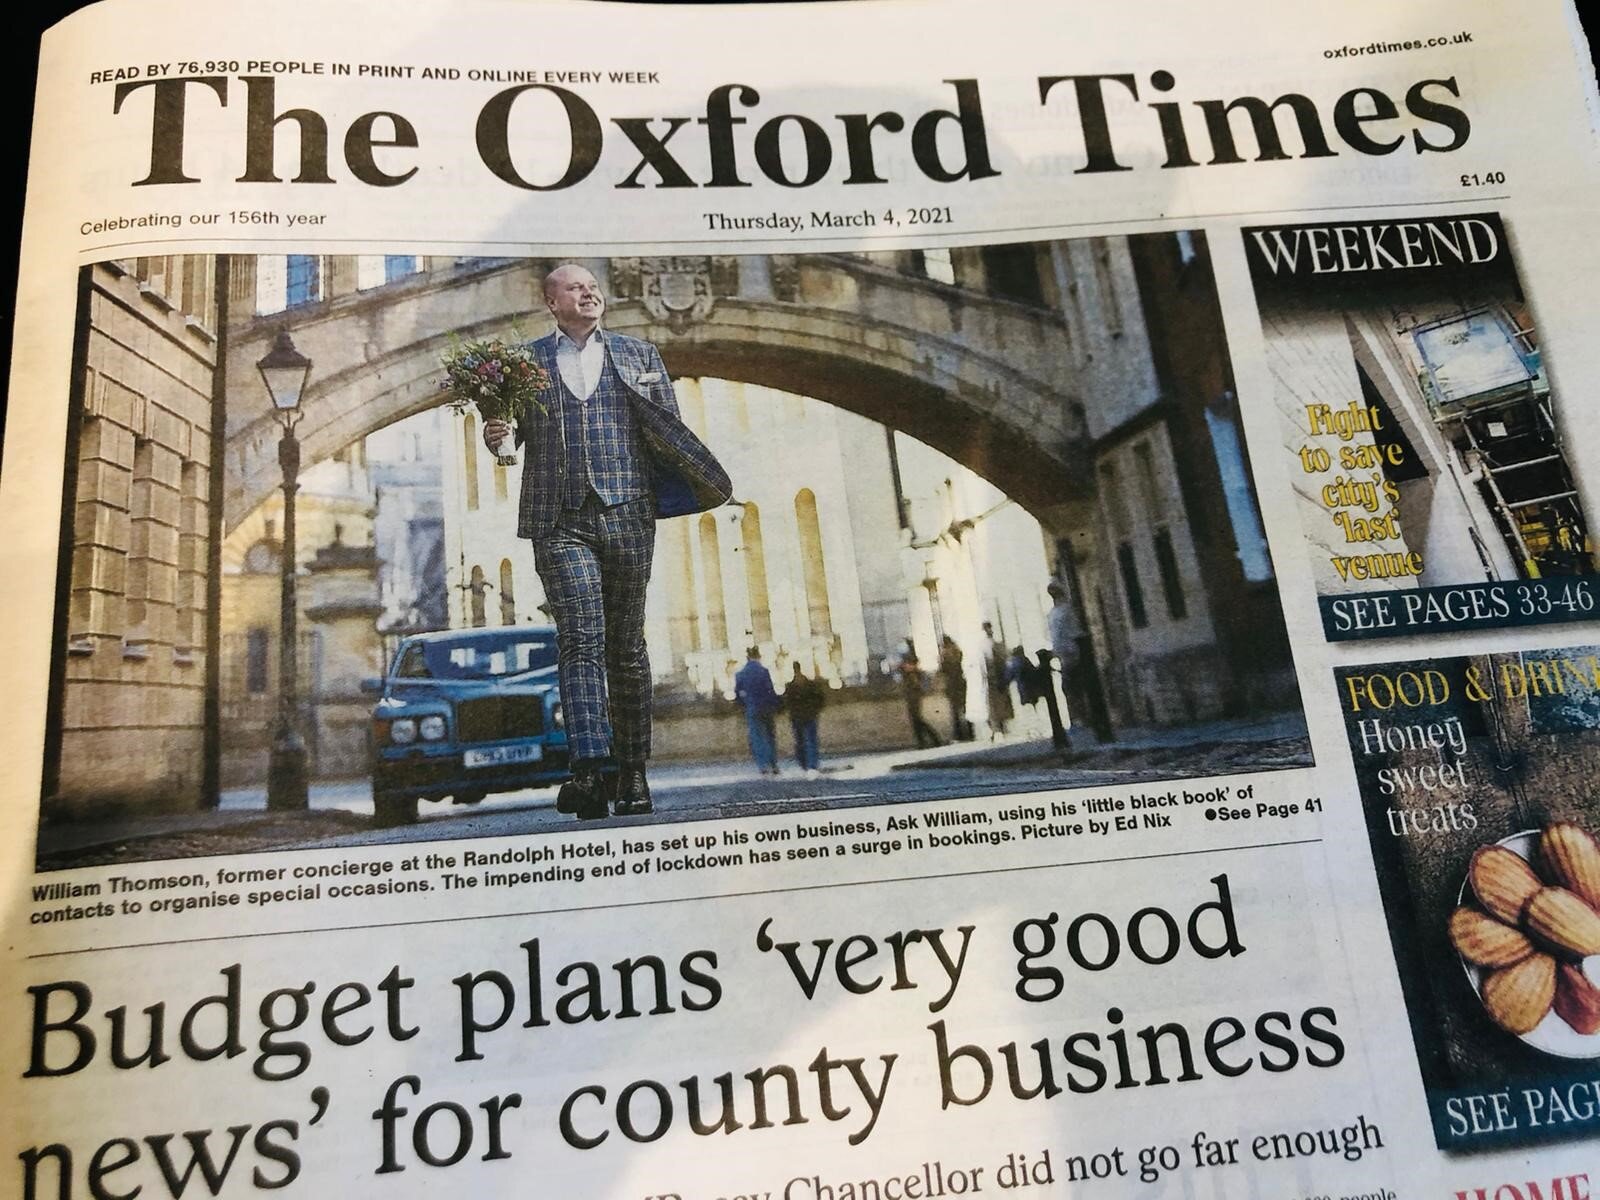 oxford times front page v1 4 march 2021.jpg